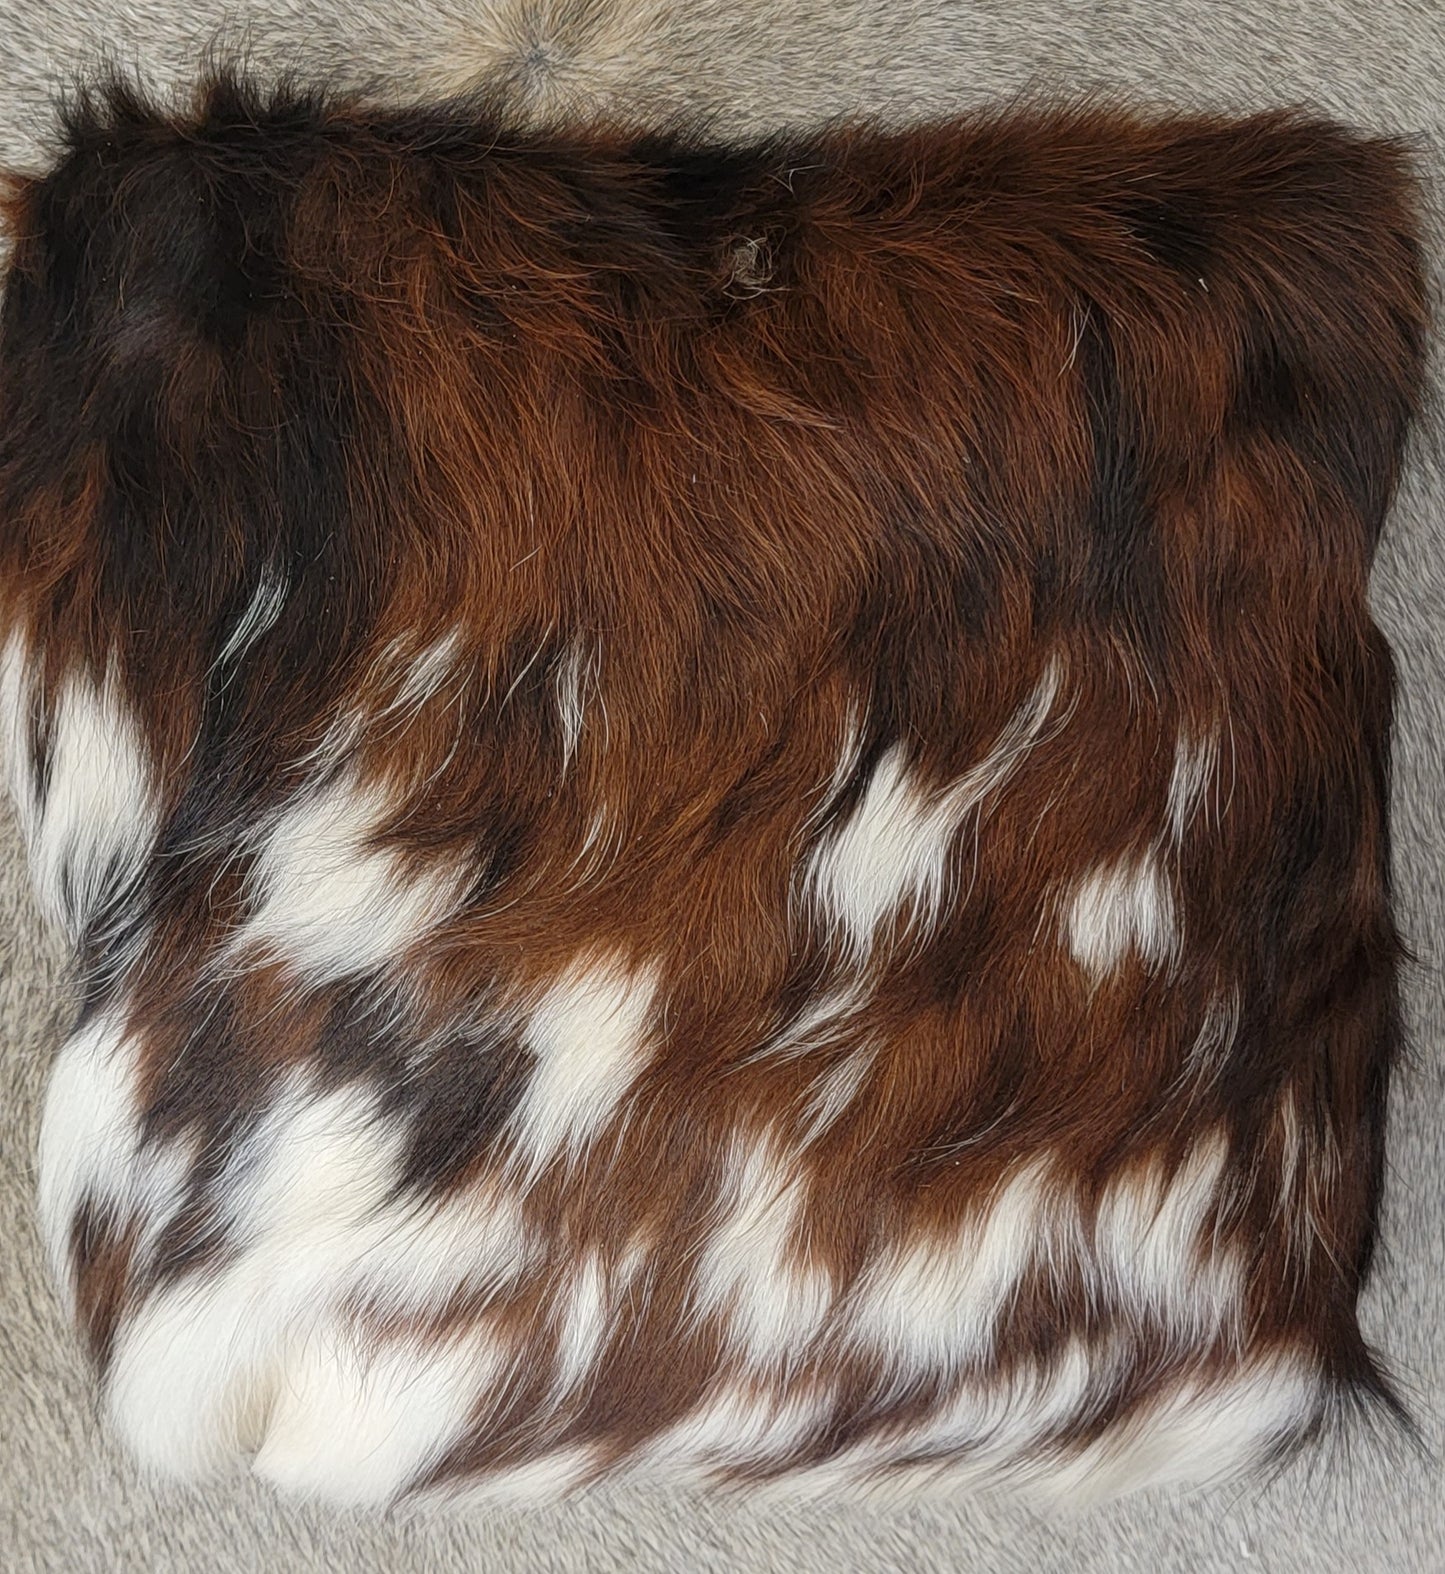 Cowhide Pillow